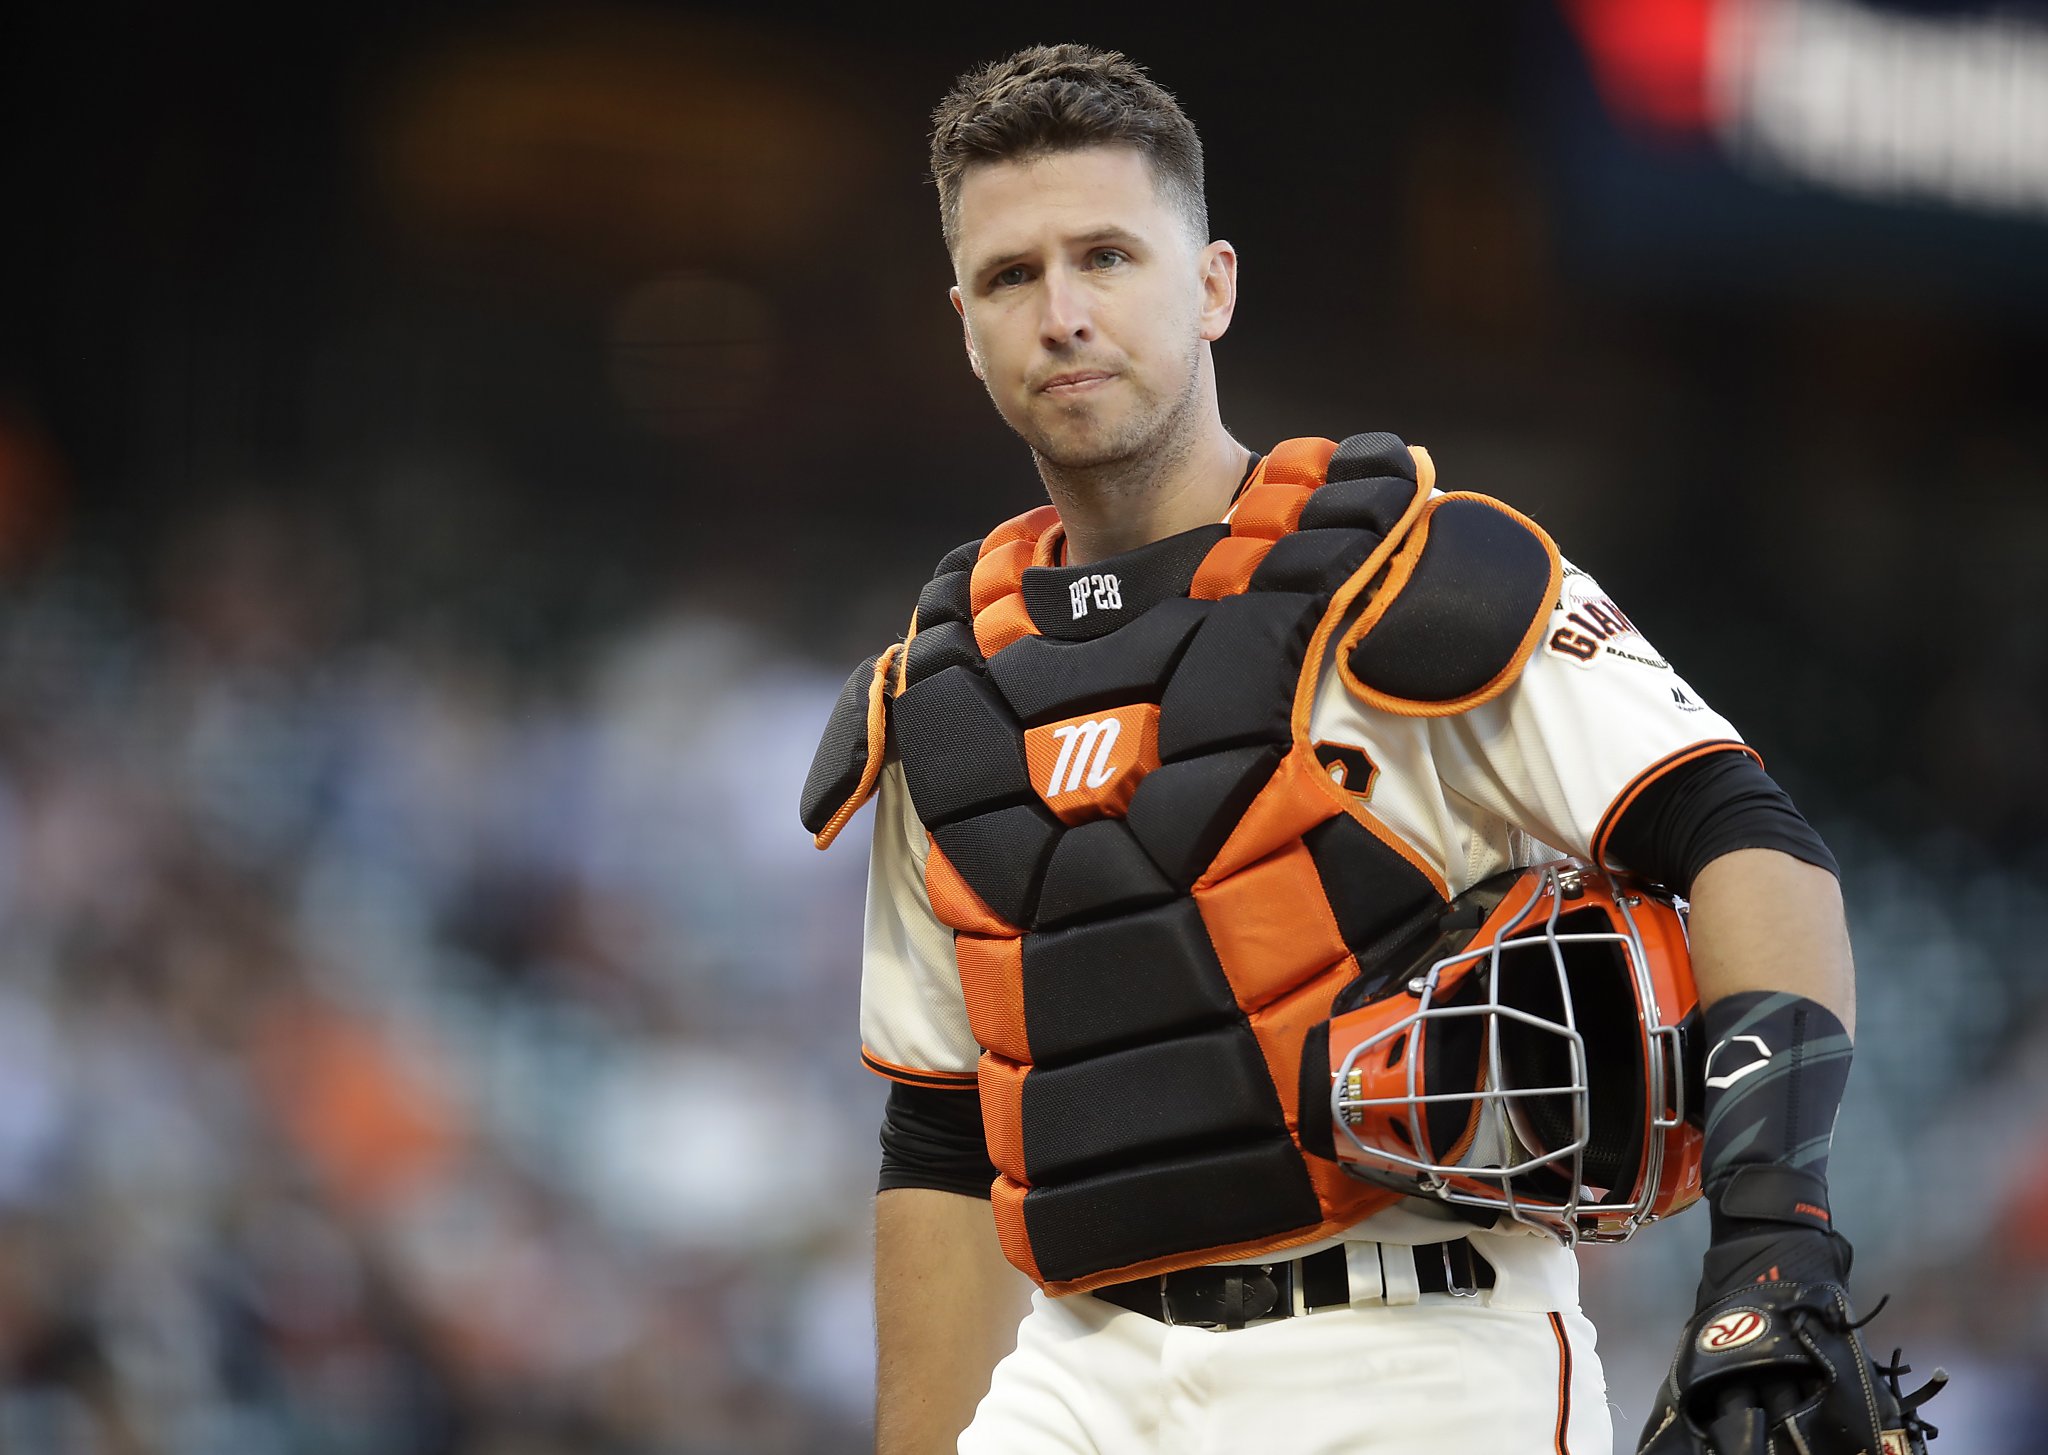 San Francisco Giants: Buster Posey Potential Transition to Third Base